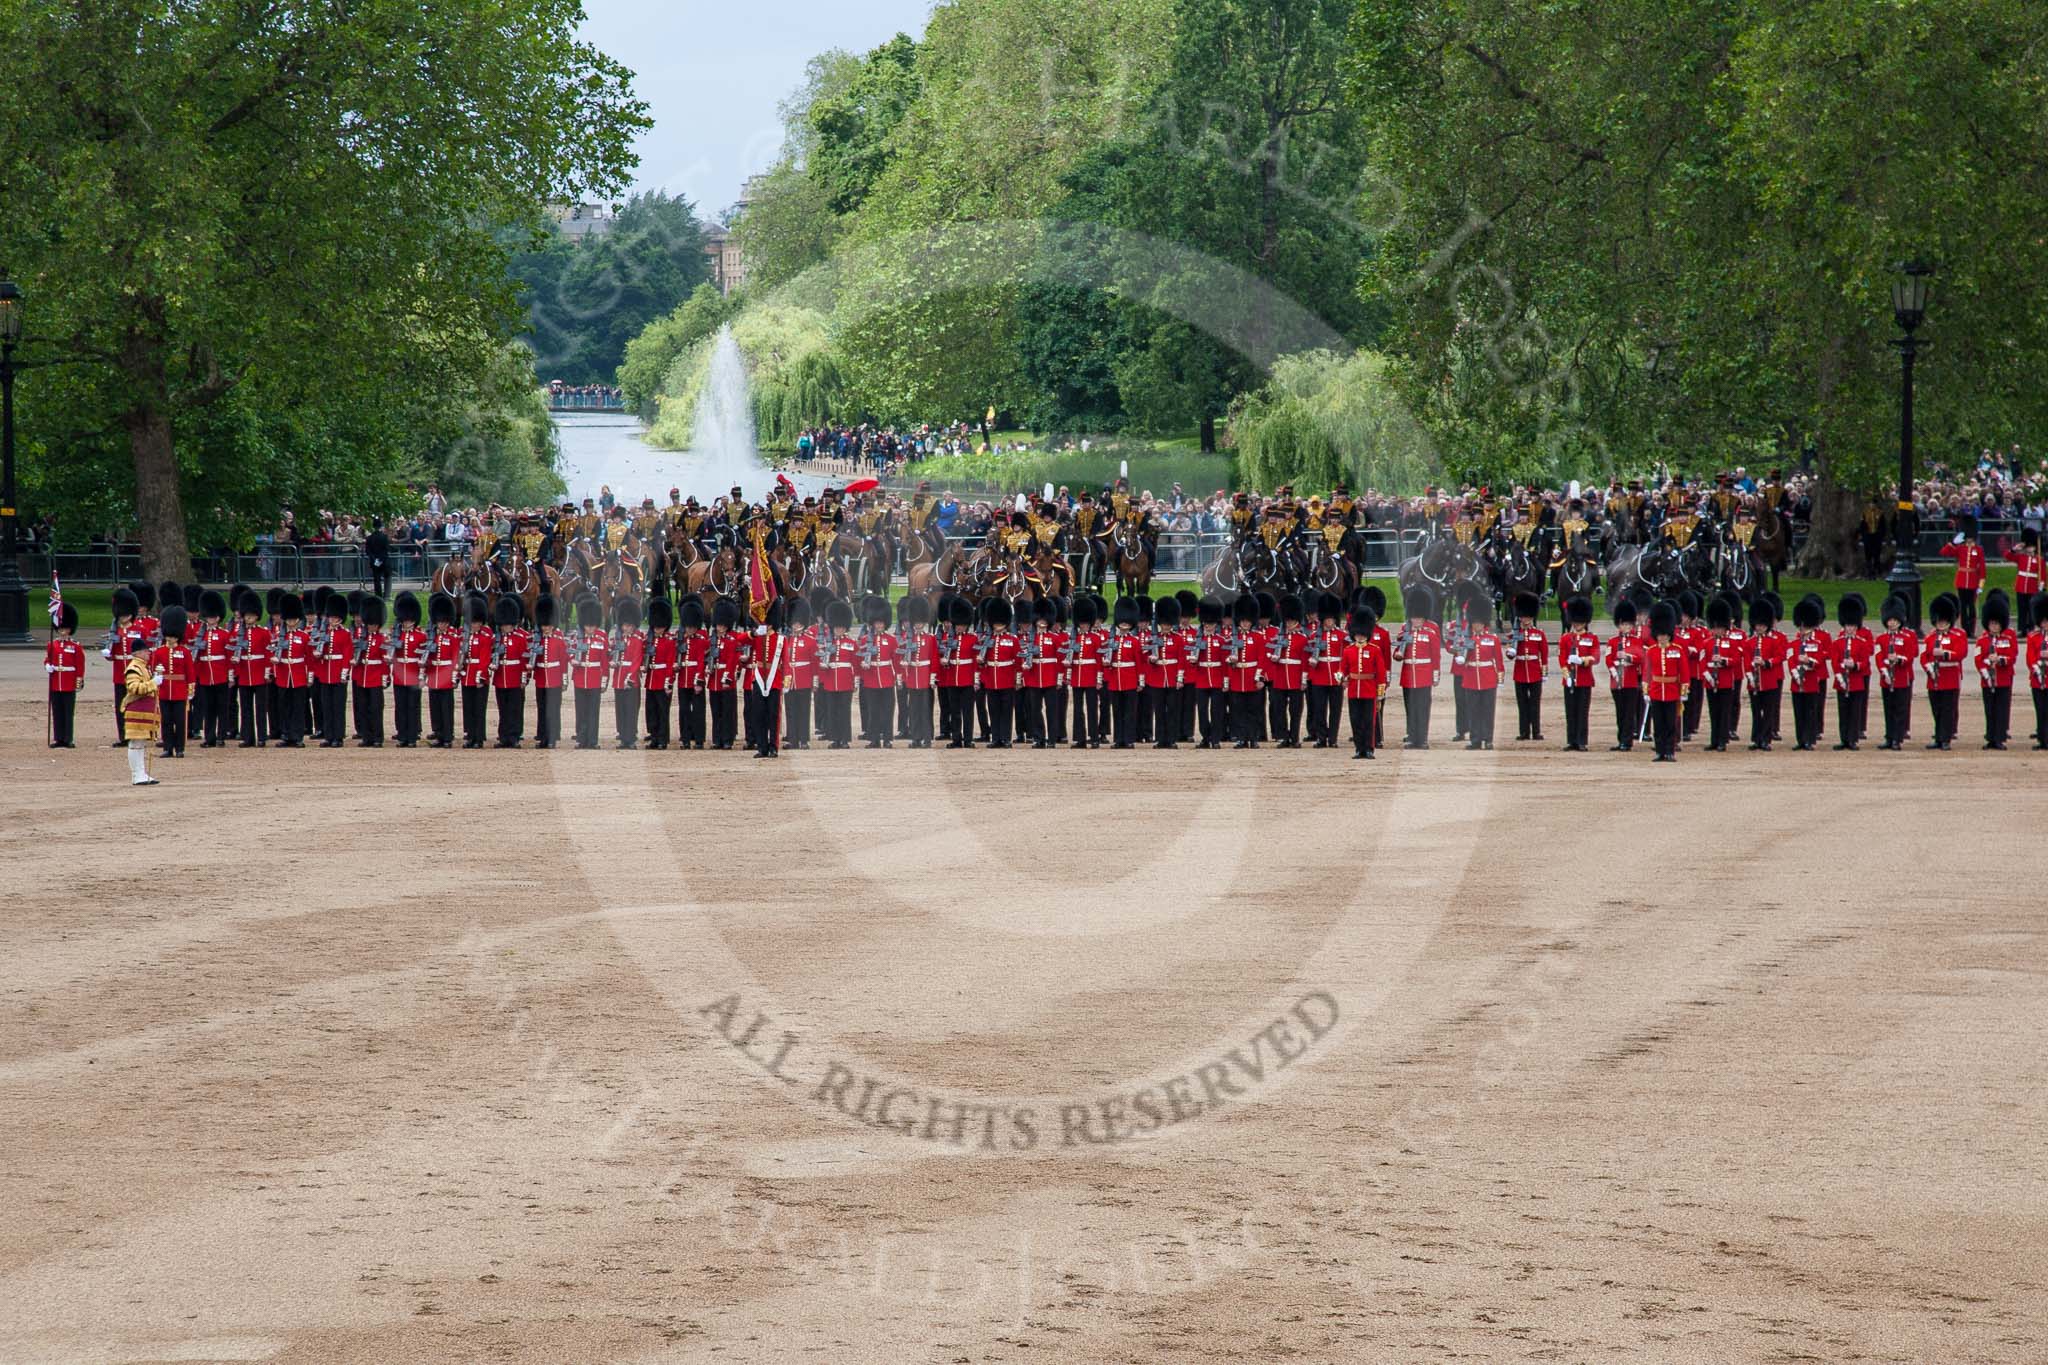 Trooping the Colour 2012: The Colour has been trooped through the ranks, and No. 1 Guard, the Escort to the Colour, has returned to the original position on Horse Guards Parade..
Horse Guards Parade, Westminster,
London SW1,

United Kingdom,
on 16 June 2012 at 11:28, image #359